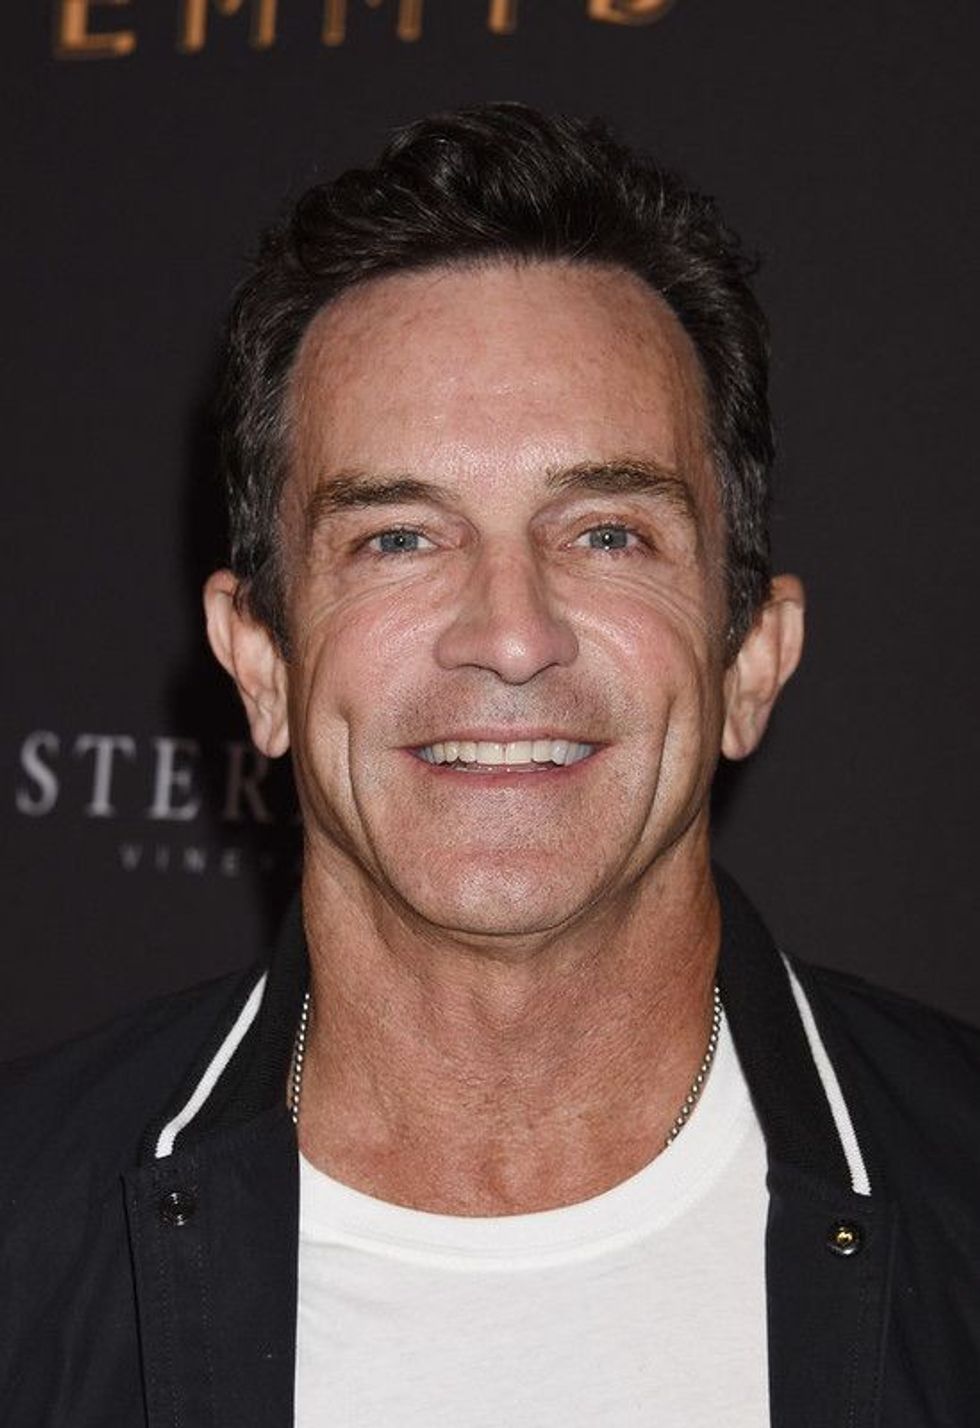 Find out more about Jeff Probst's family, net worth, and how he started his career.